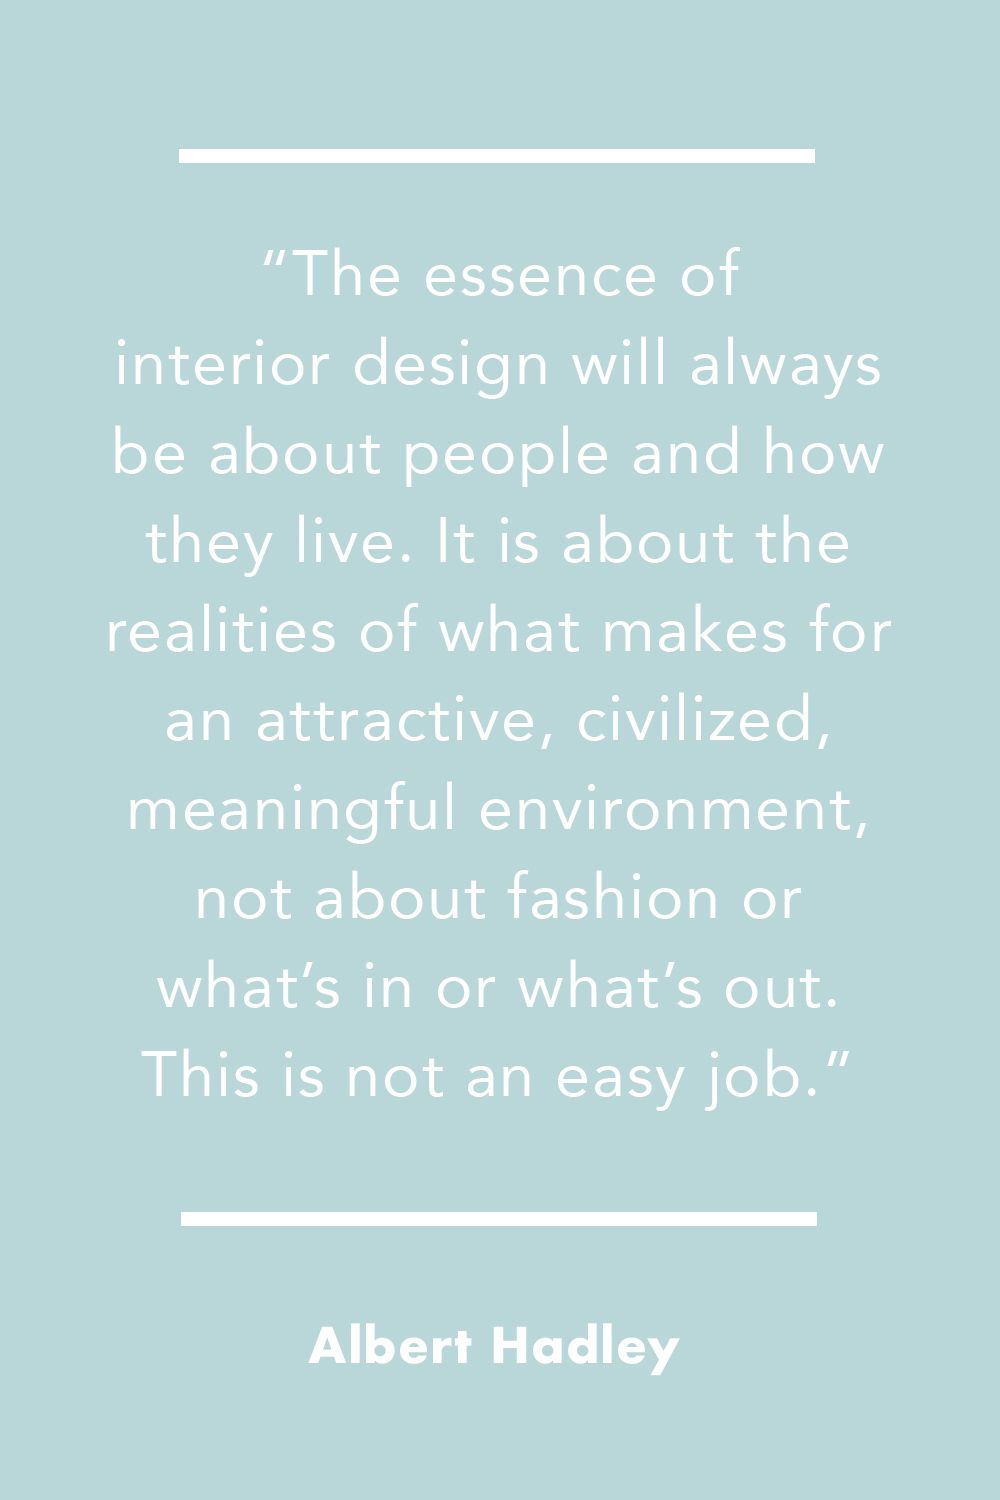 fashion quotes and sayings by designers